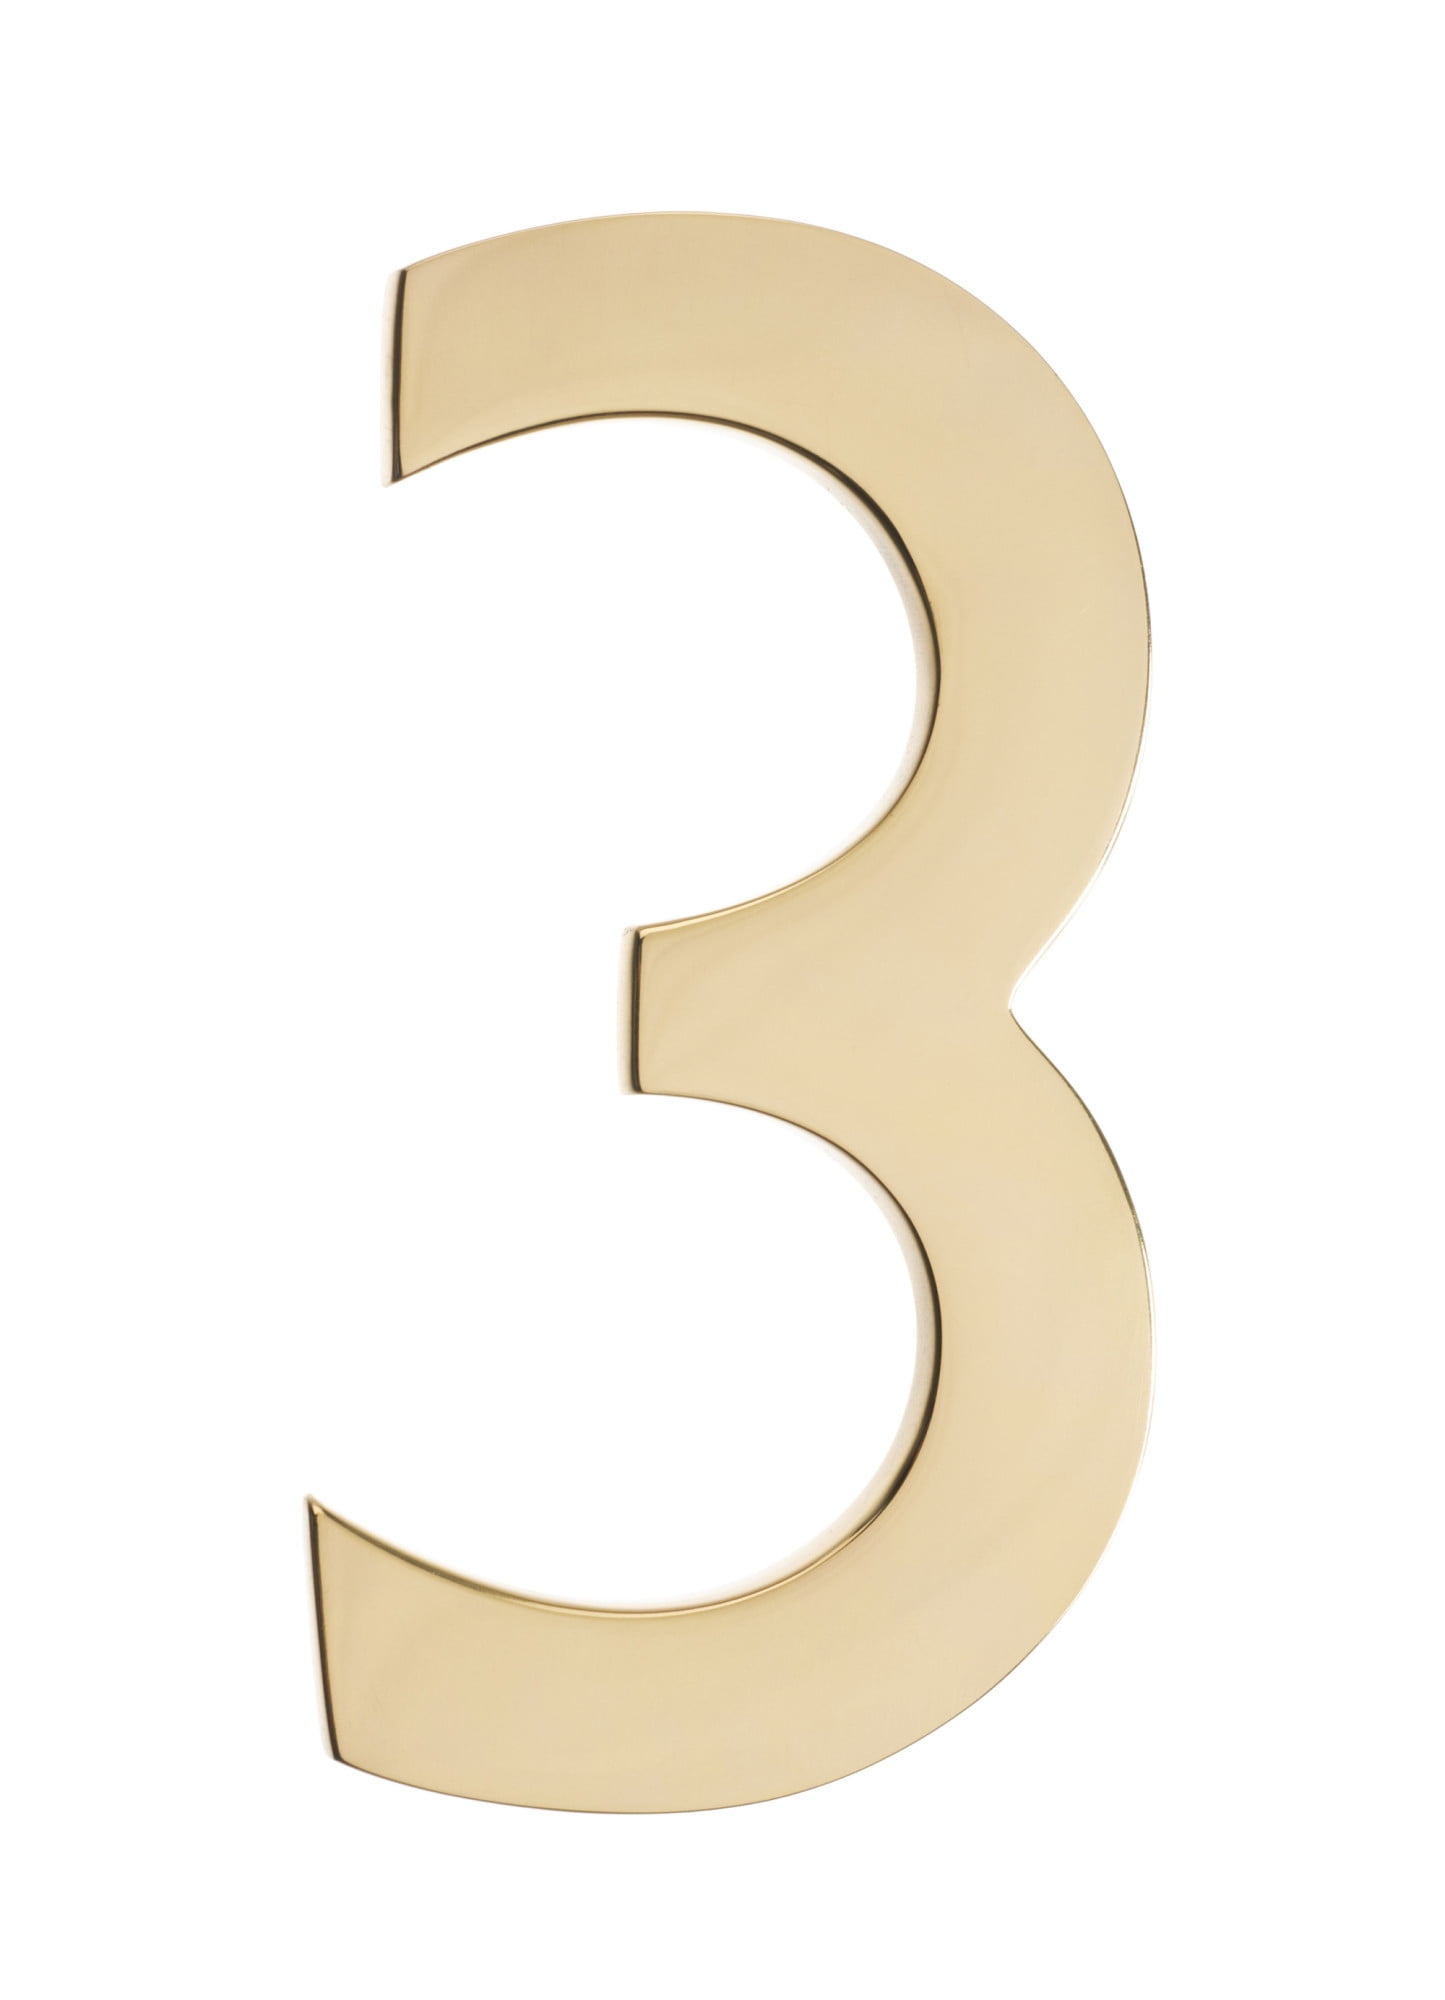 3582pb-3 Floating House Number 3, Polished Brass - 4 In.